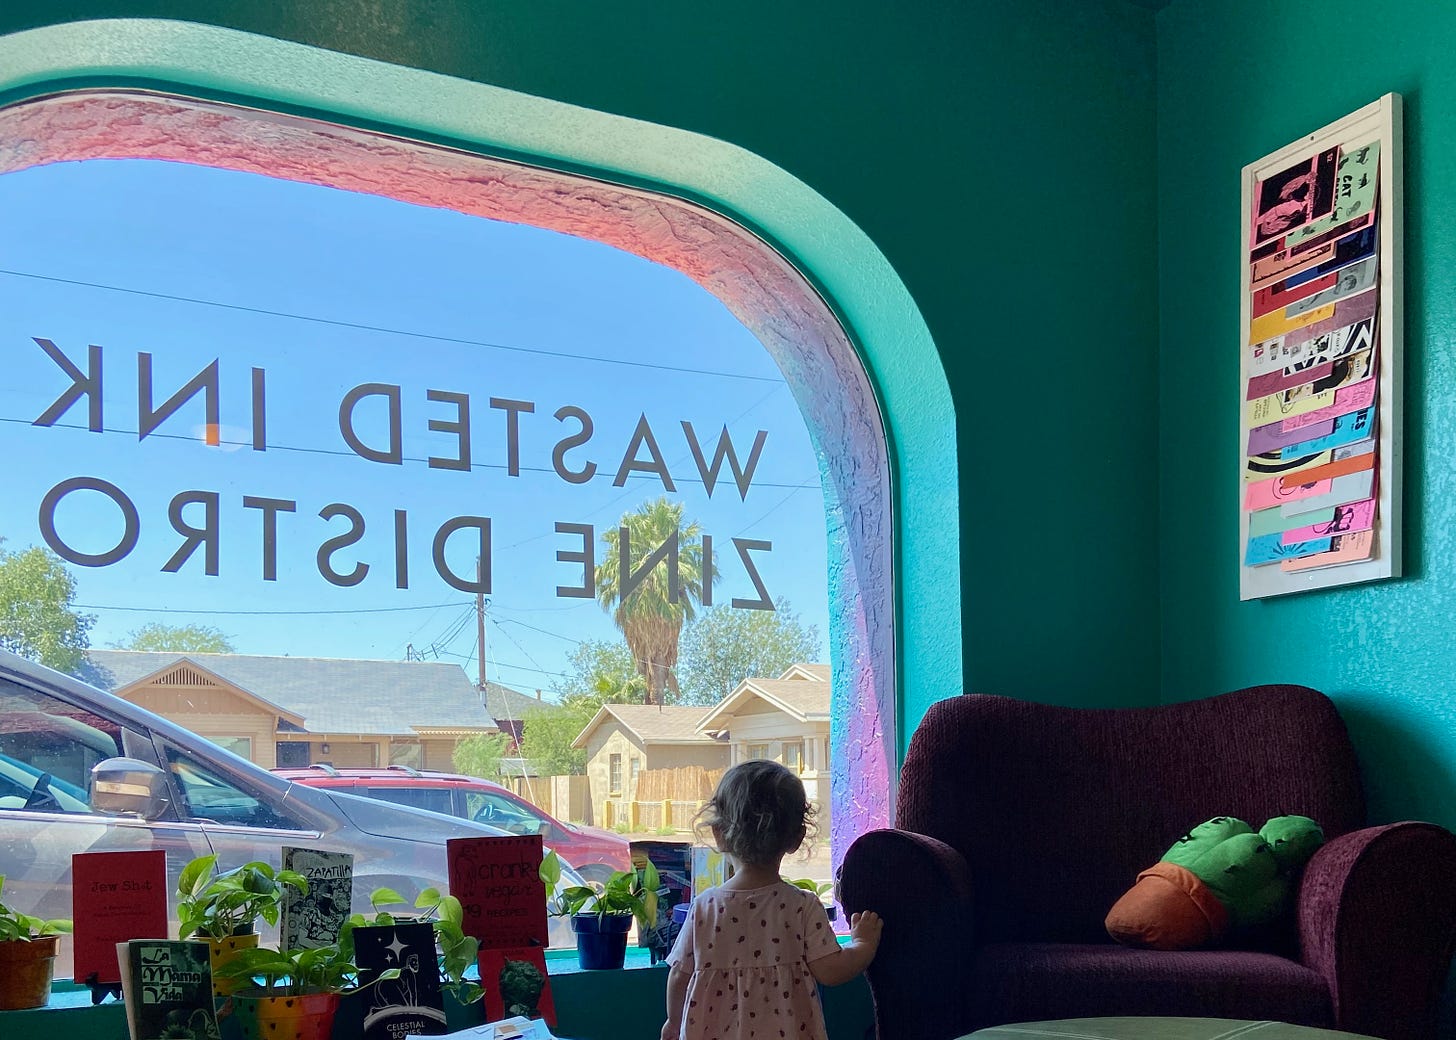 The reading nook at Wasted Ink featuring a comfy purple chair, teal walls, and my young daughter looking out the window